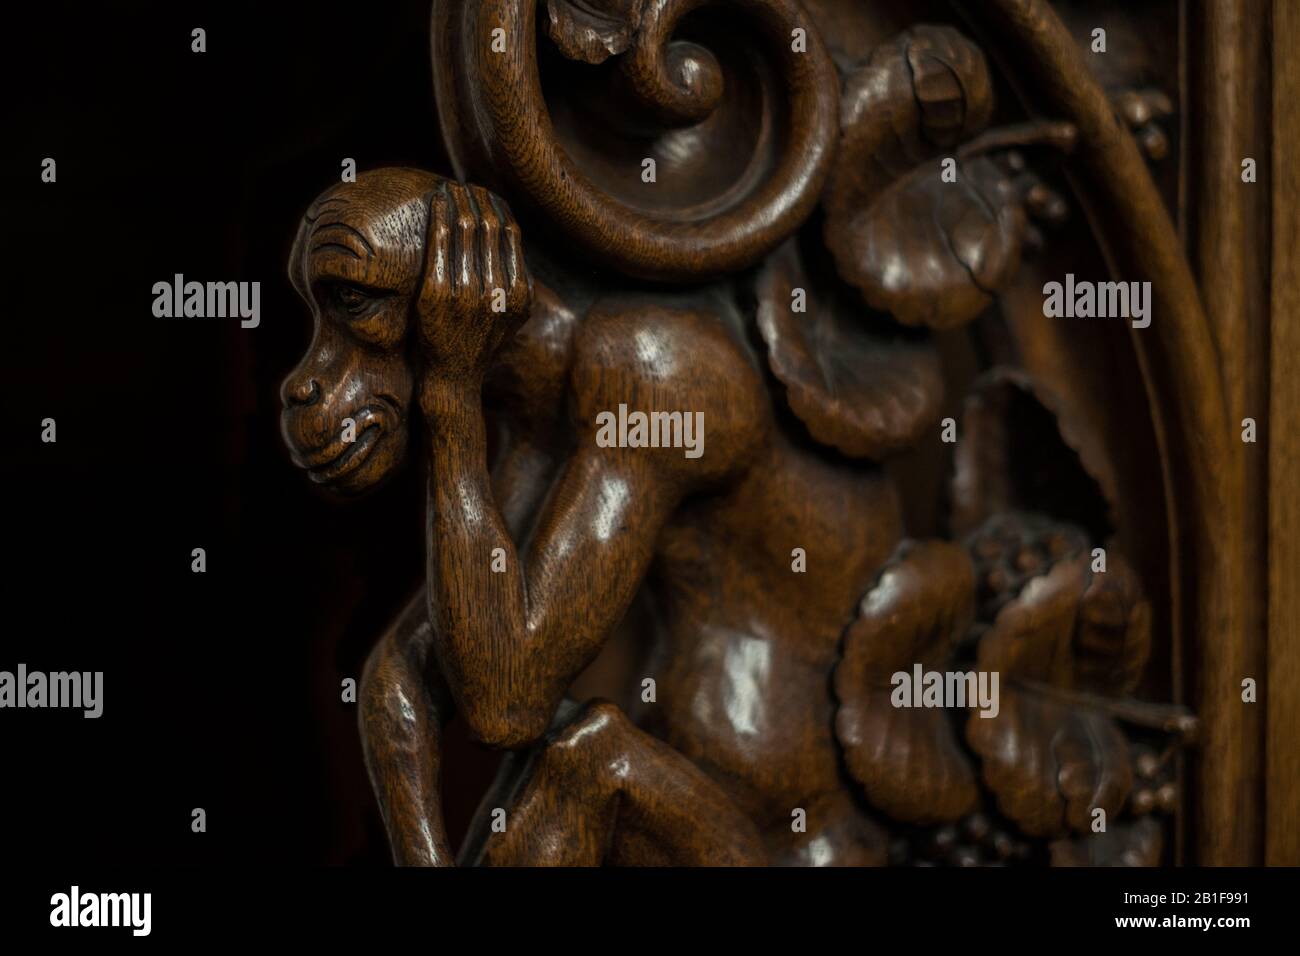 The 'St. Maria im Kapitol' church has stunning artwork. Here, at the entrance, there is a wooden sculpture of a monkey, seeminlgy with worries. Stock Photo